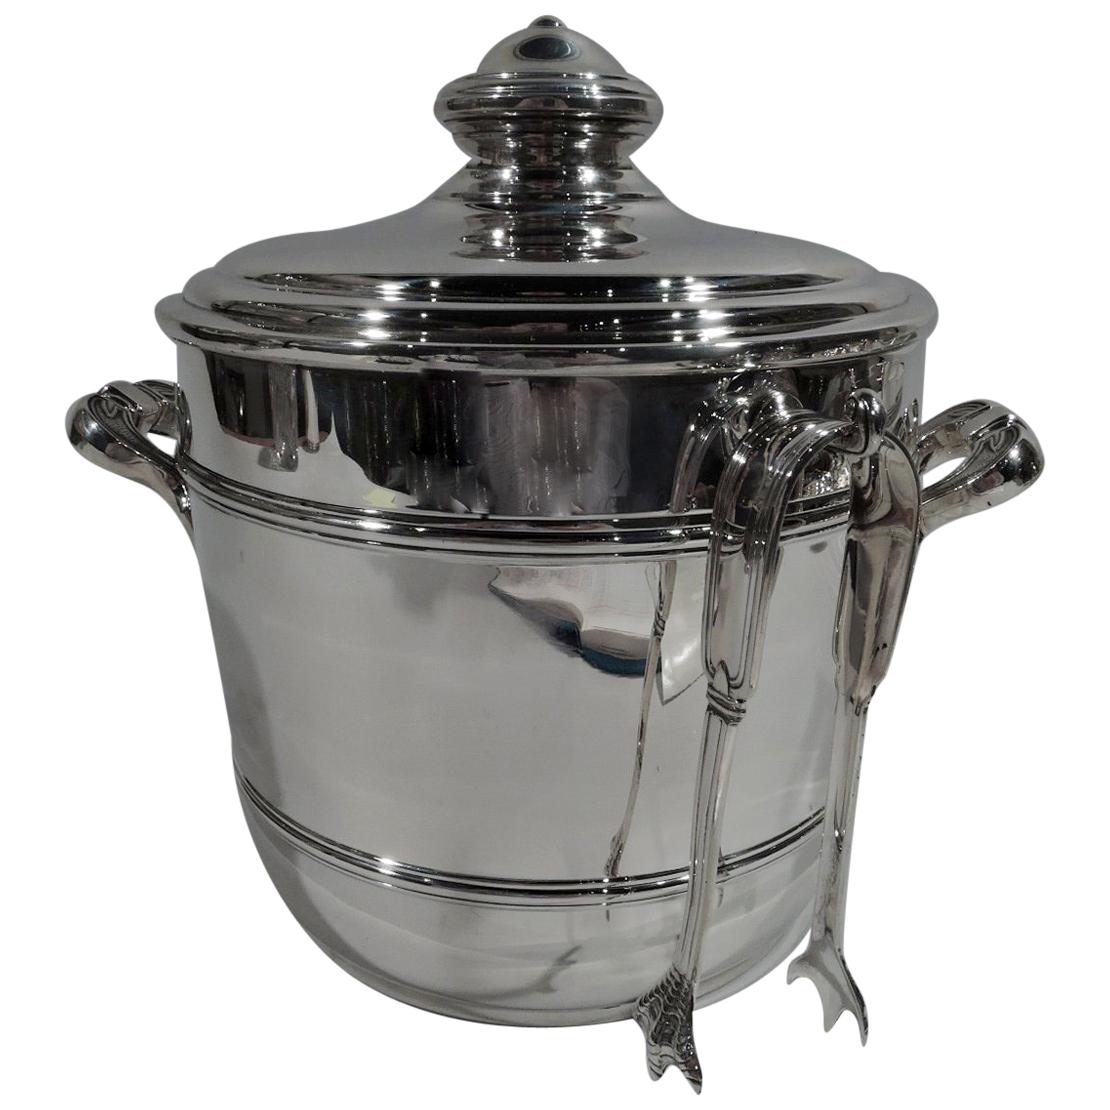 Cartier Mid-Century Modern Sterling Silver Ice Bucket with Tongs